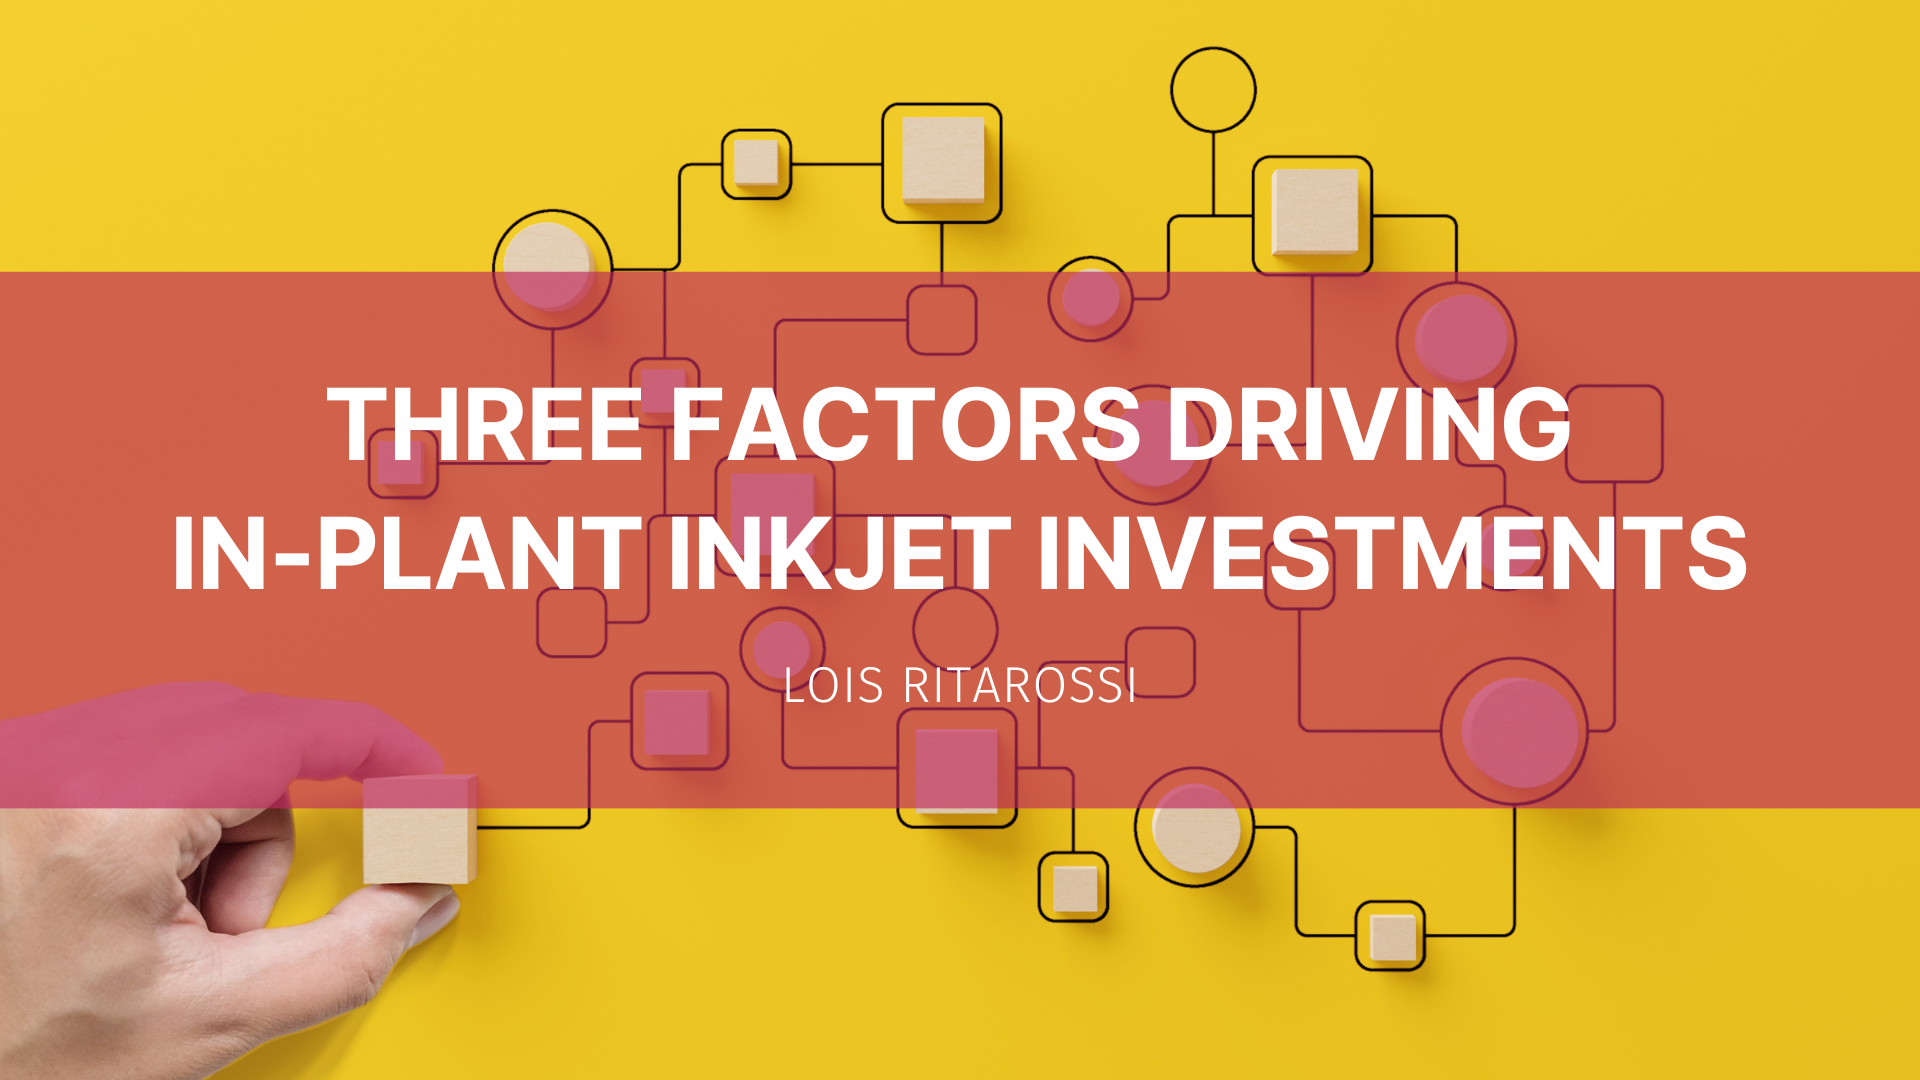 Featured image for “Three Factors driving in-plant inkjet investments”